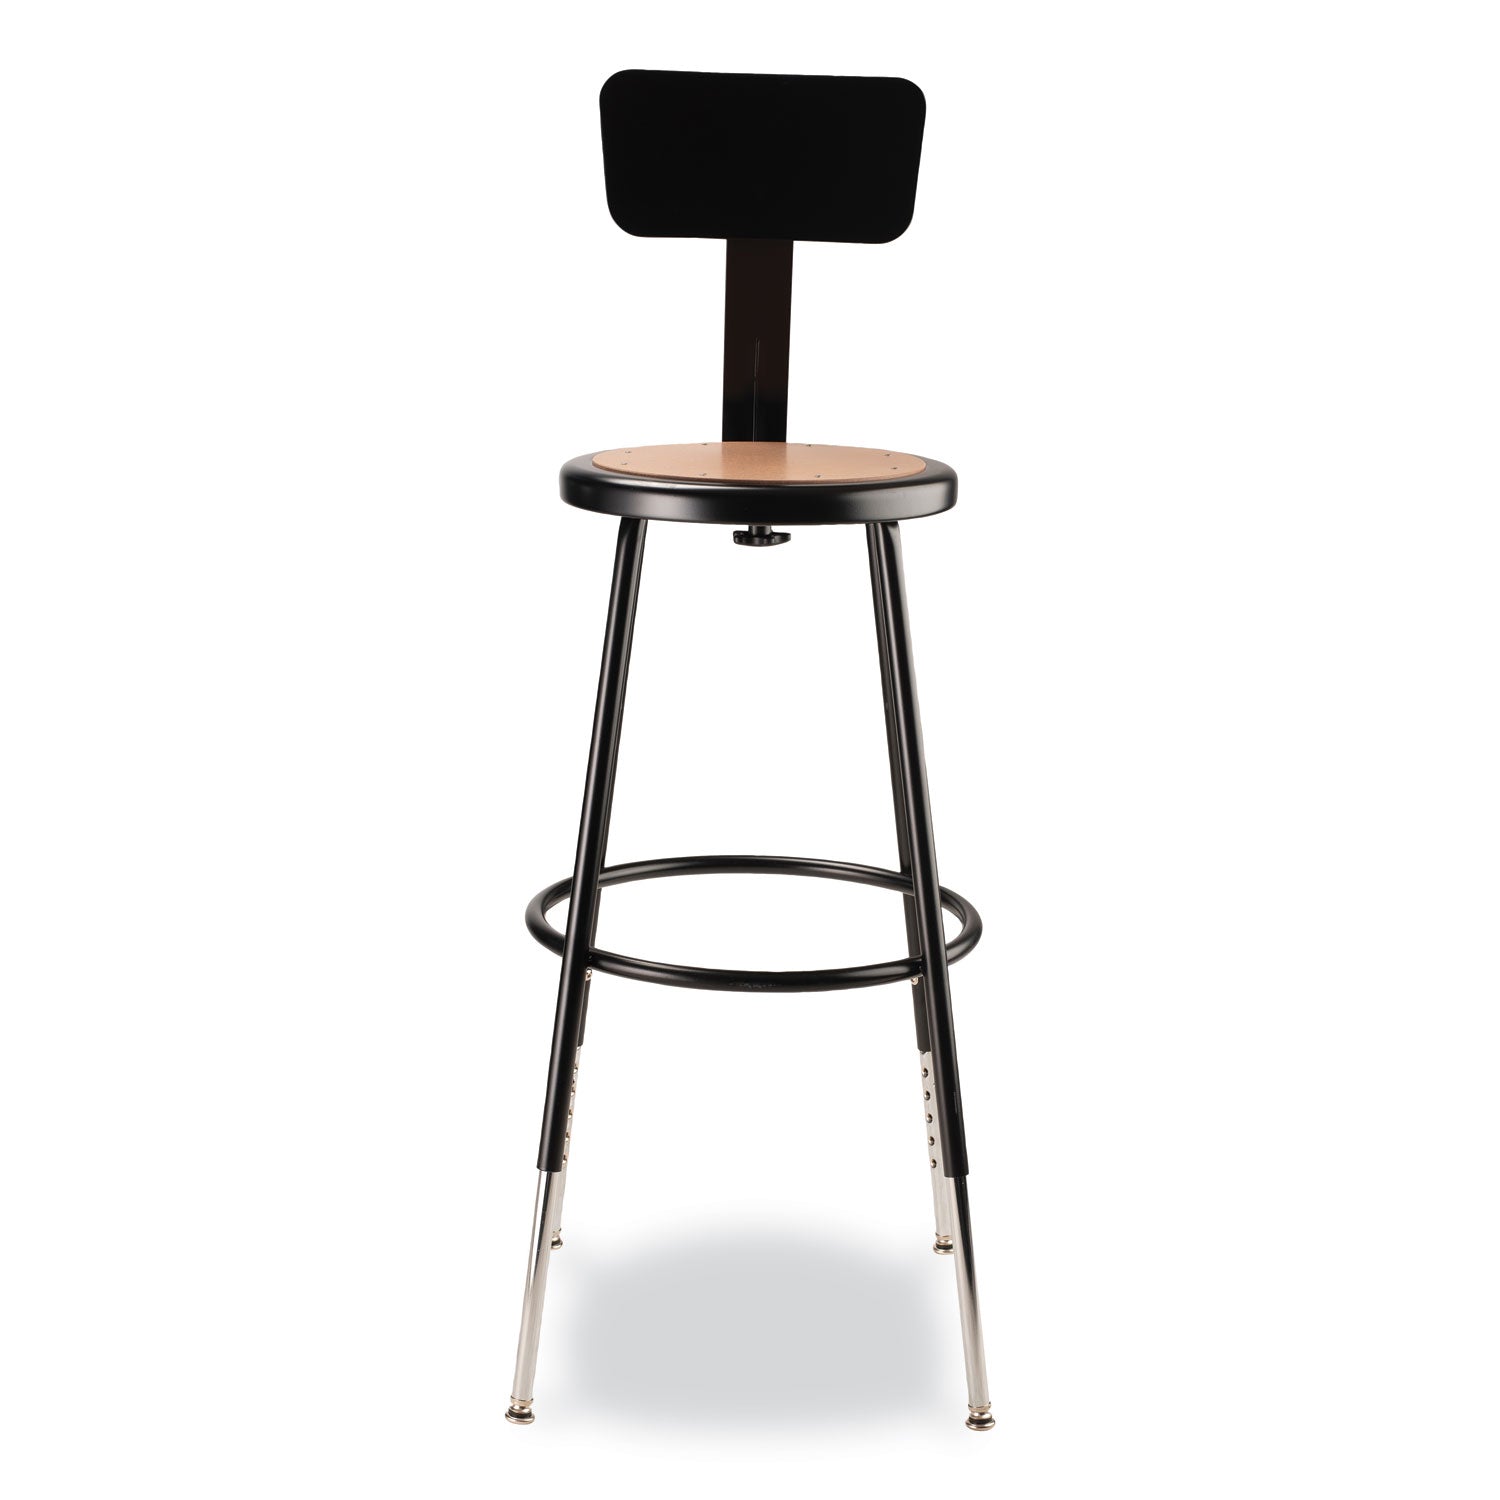 6200-series-25-33-height-adj-heavy-duty-stool-with-backrest-supports-500-lb-brown-seat-black-base-ships-in-1-3-bus-days_nps6224hb10 - 2